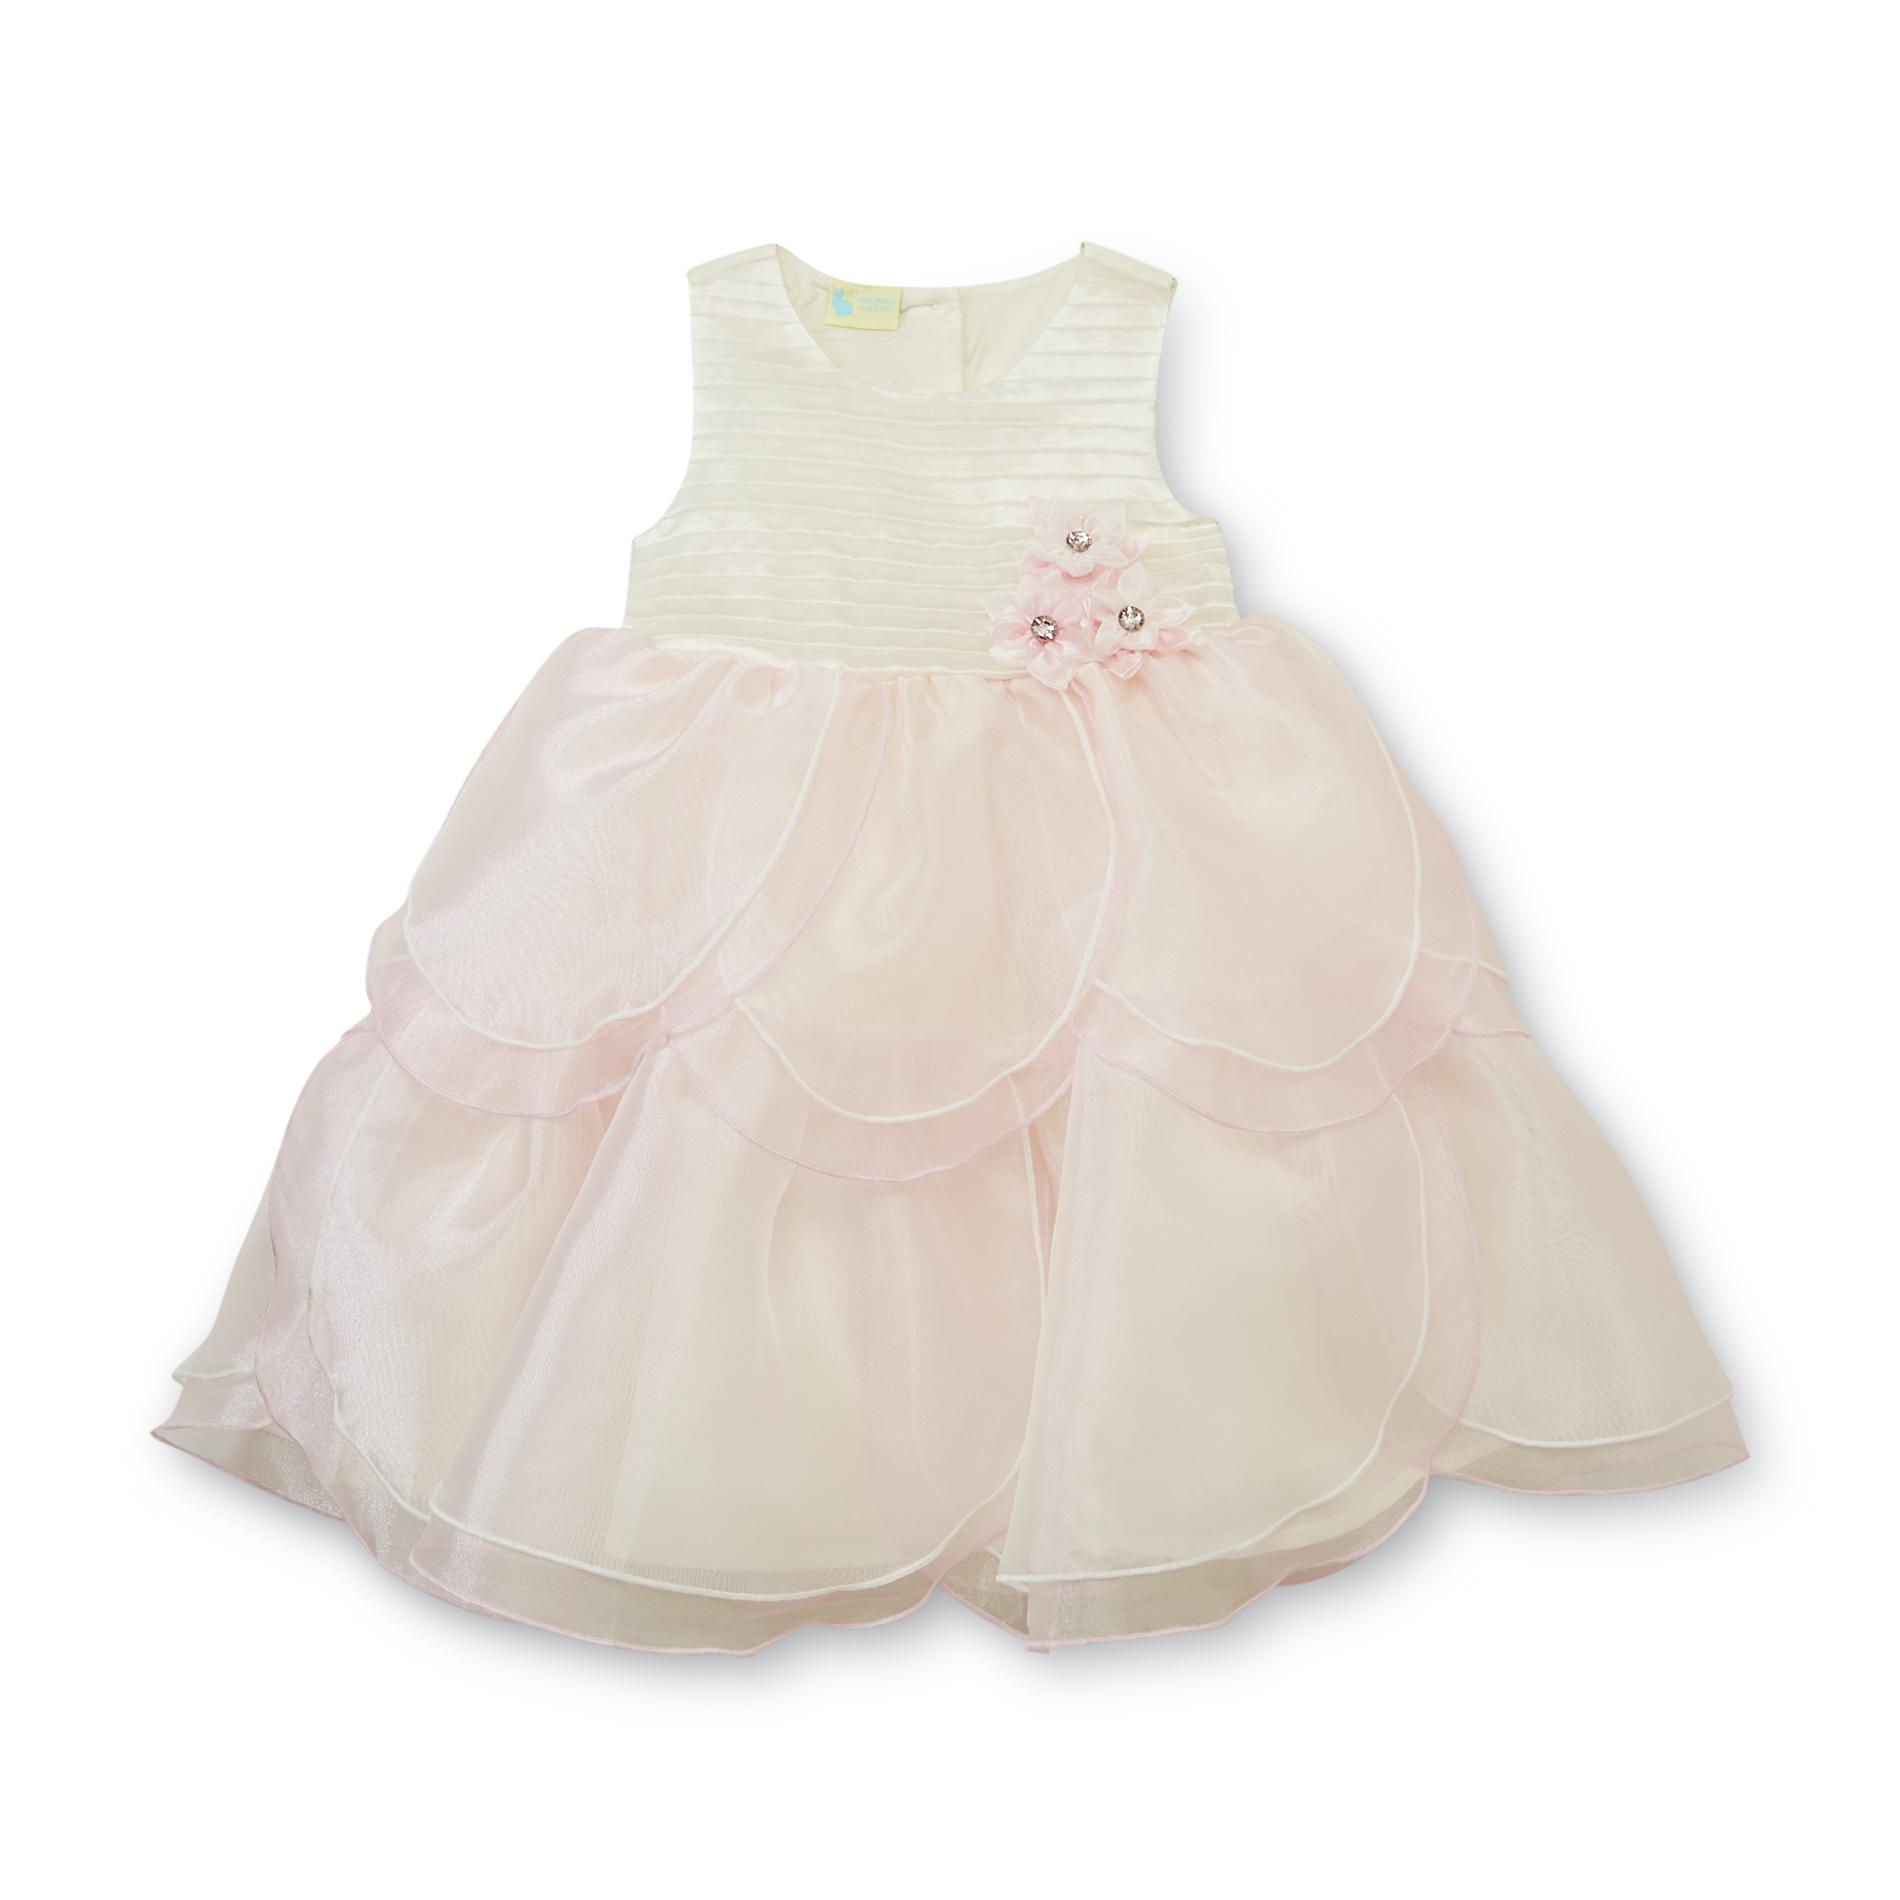 Holiday Editions Infant & Toddler Girl's Tulip Party Dress